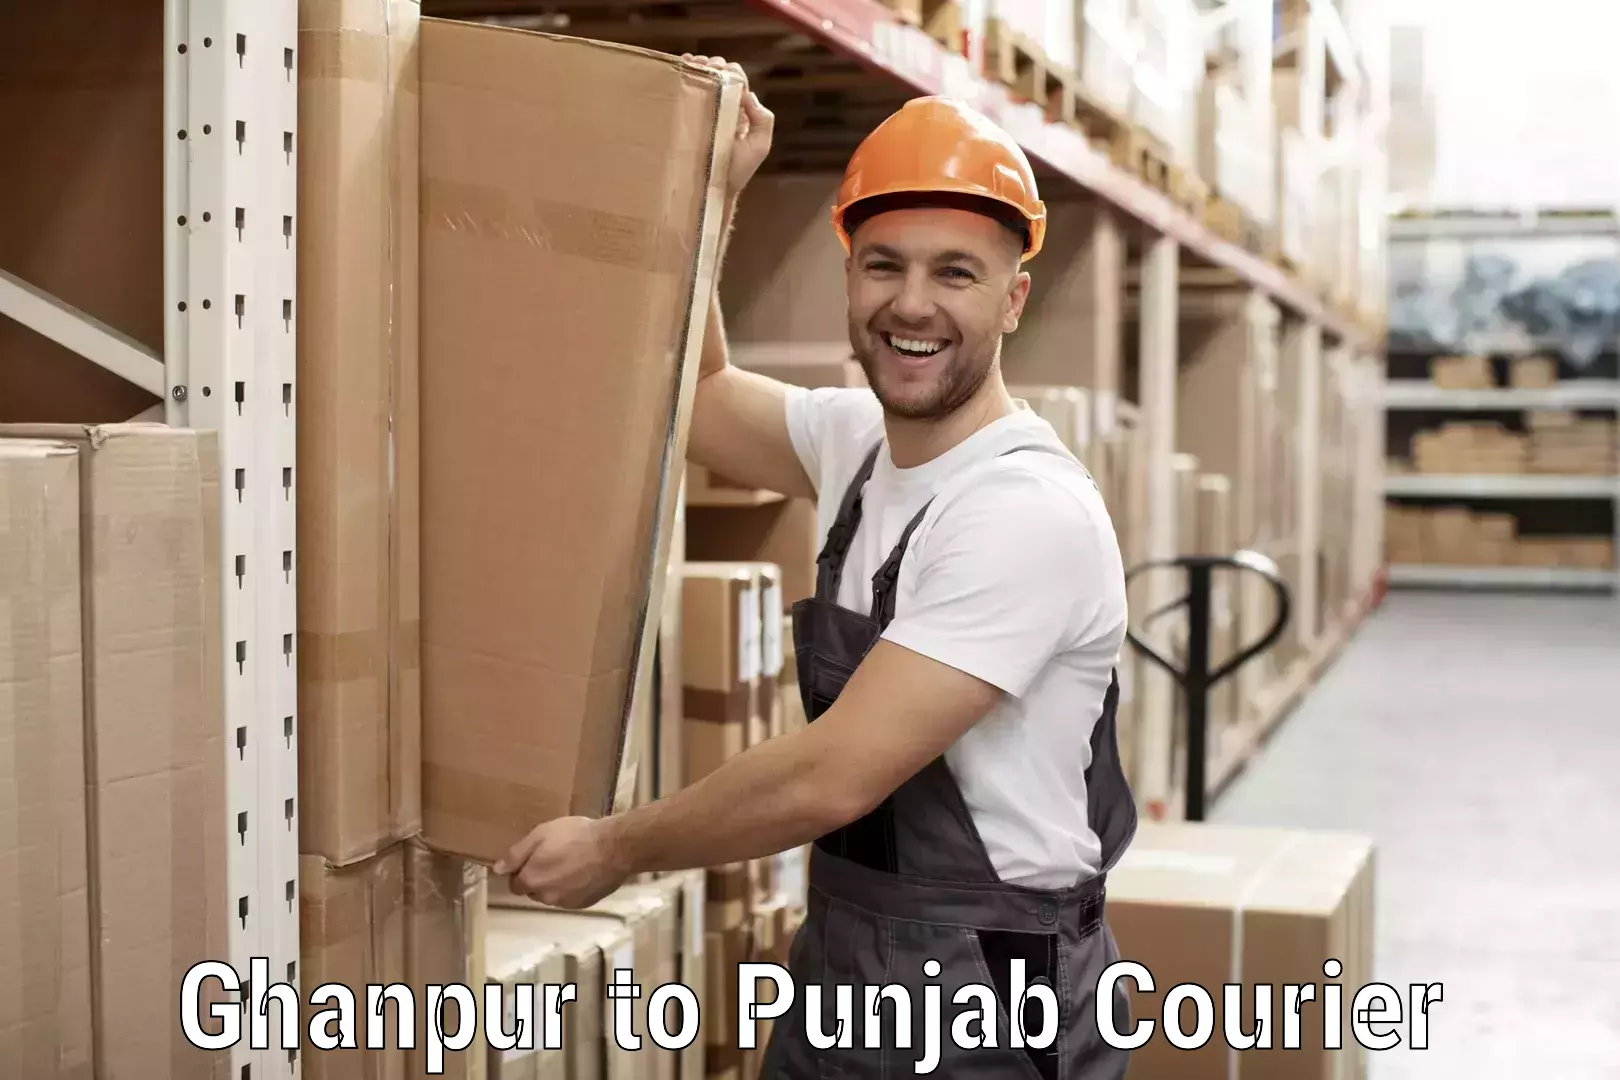 Multi-service courier options Ghanpur to Faridkot